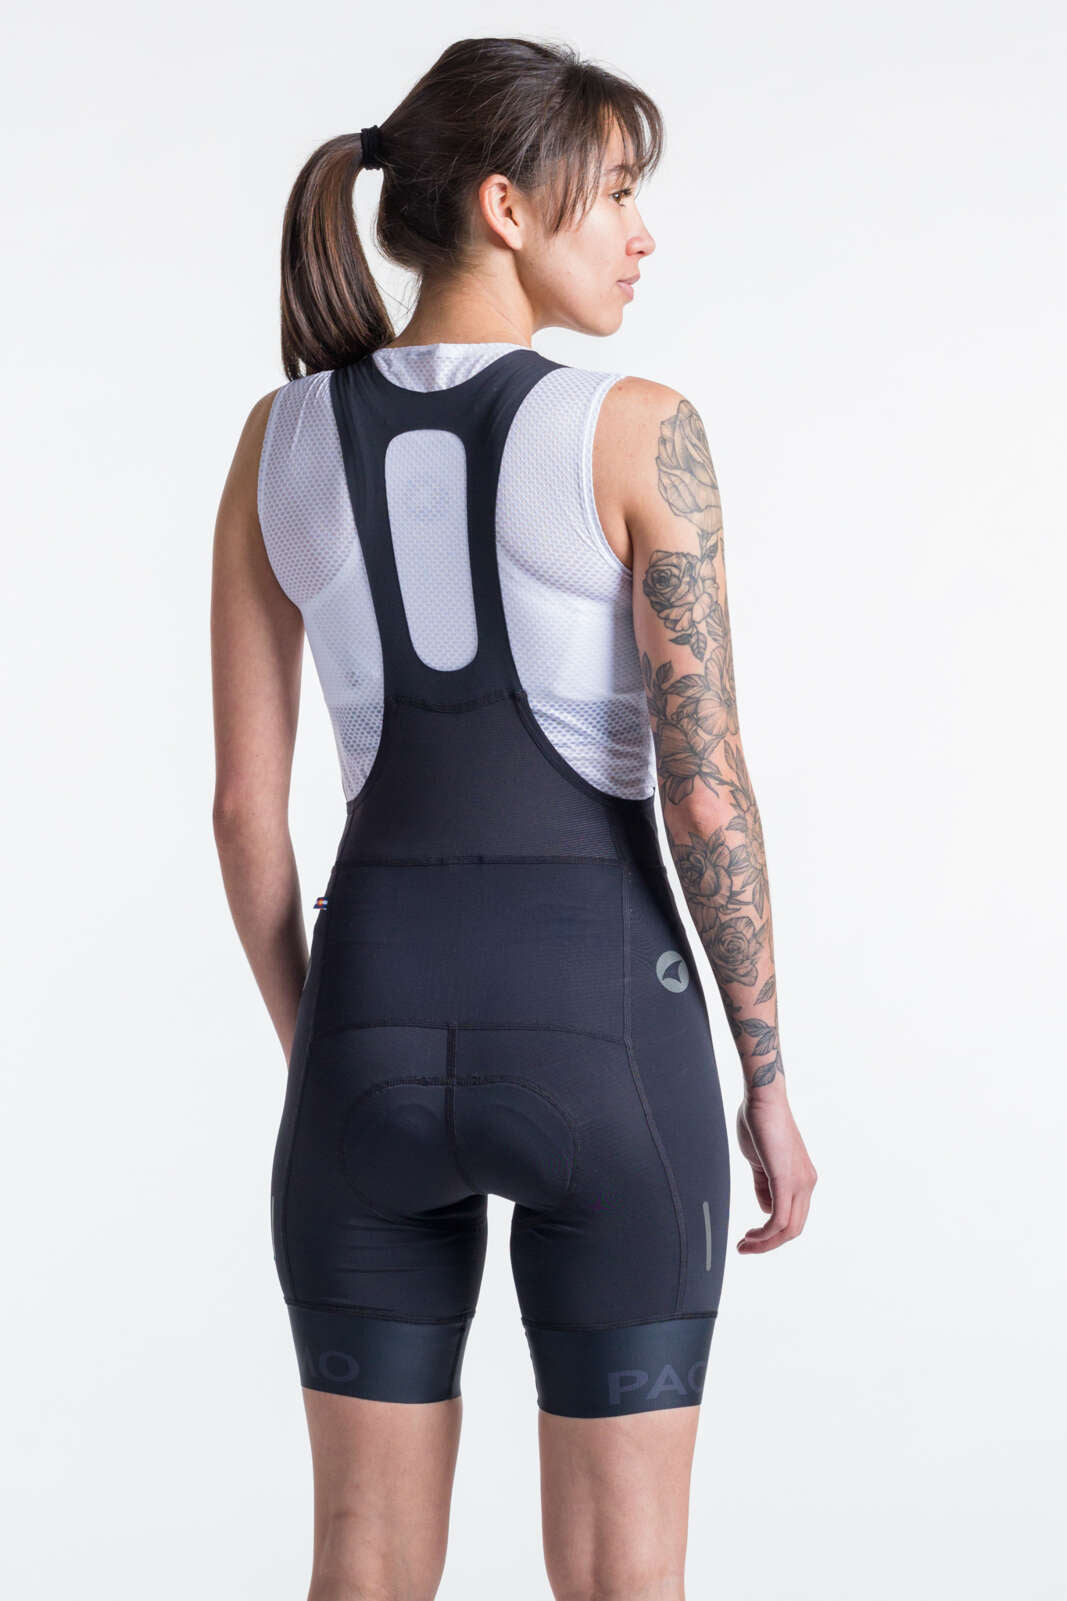 Women's Ascent Vector Pro Cycling Bibs - Back View